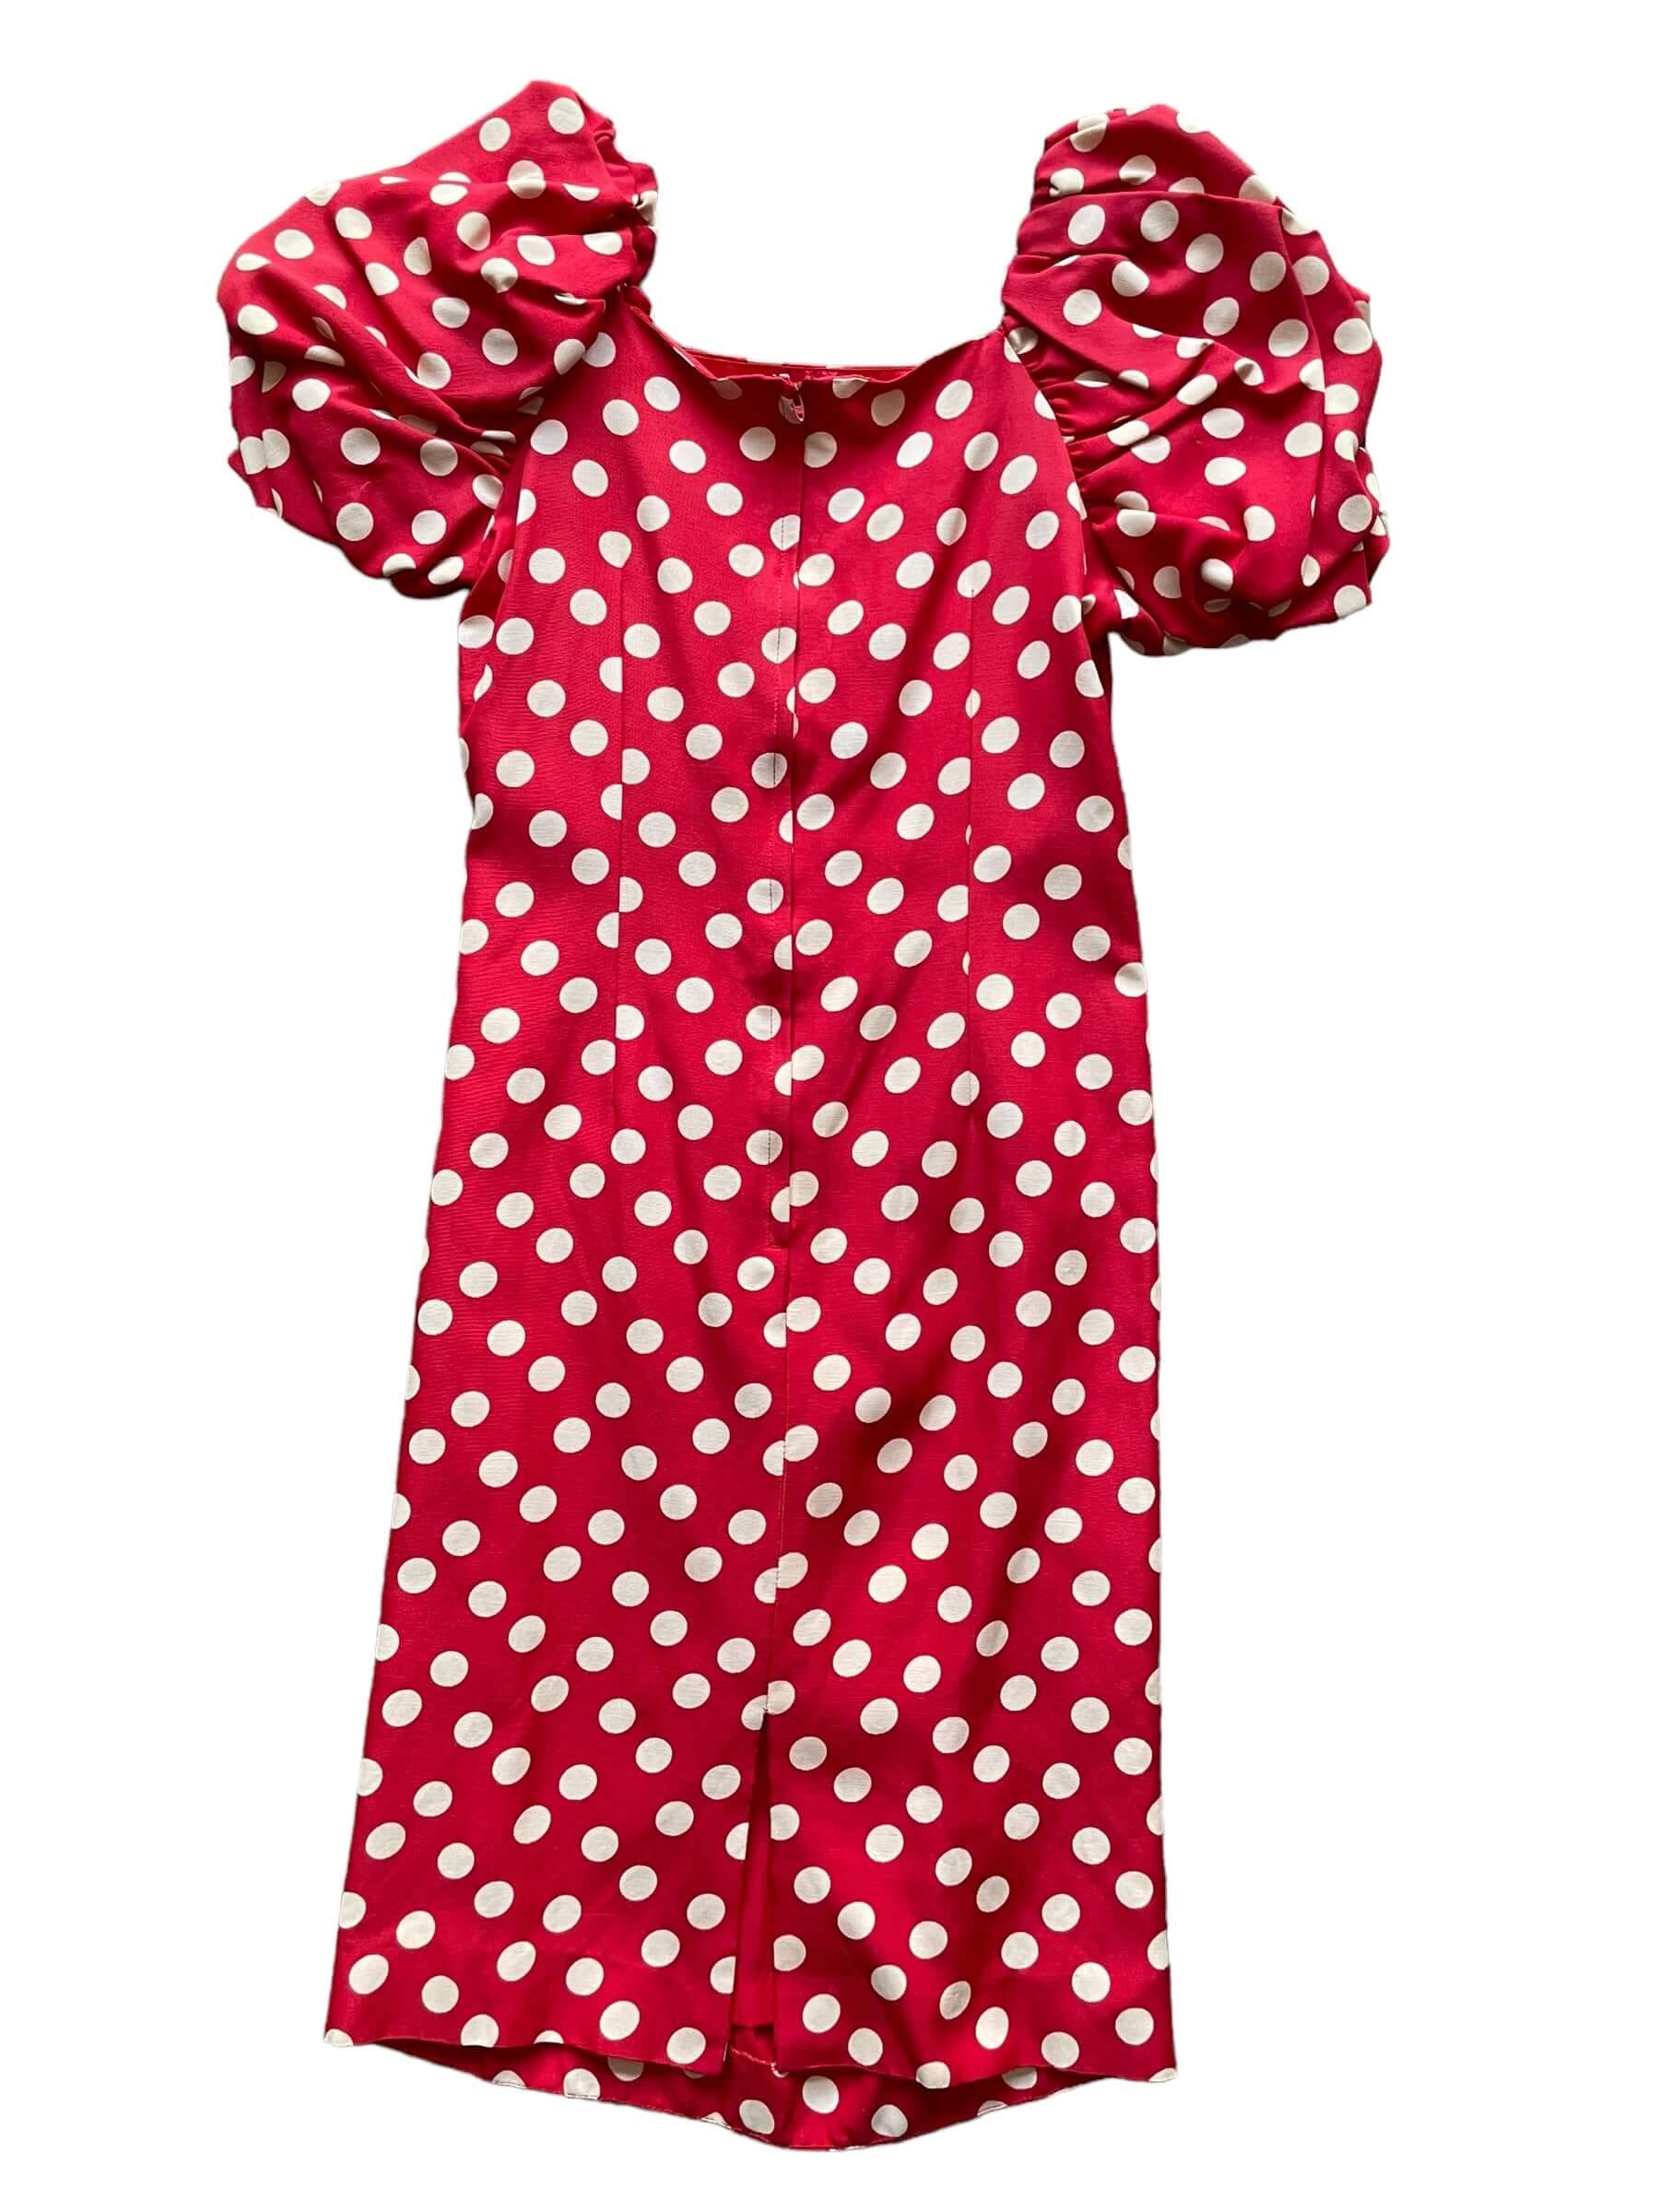 Full back view of 1980s Poofy Red Polka Dot Wiggle Dress M-L